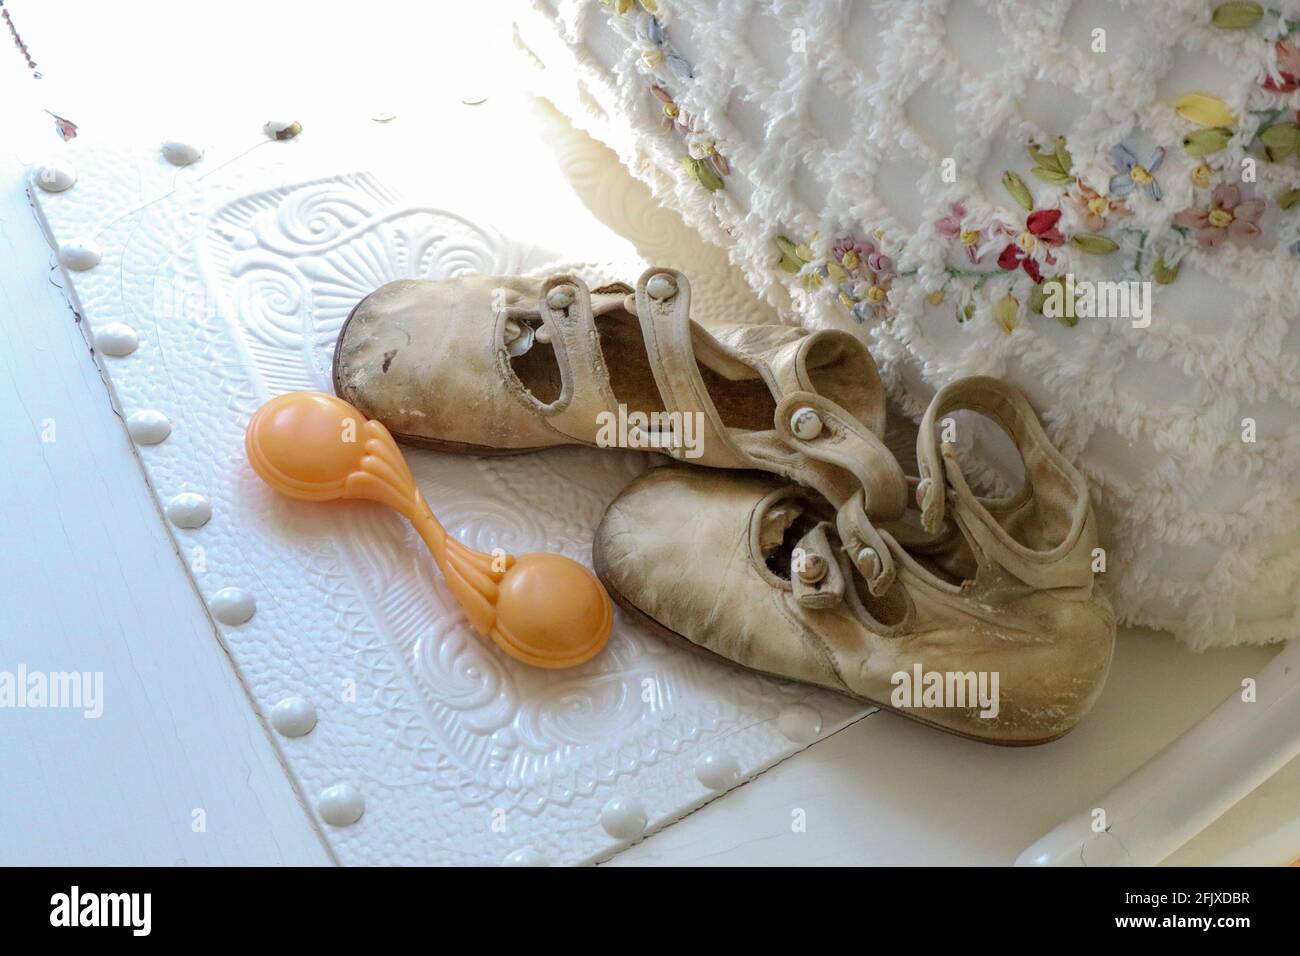 Antique baby shoes and rattle by floral and fringed pillow.jpg Stock Photo